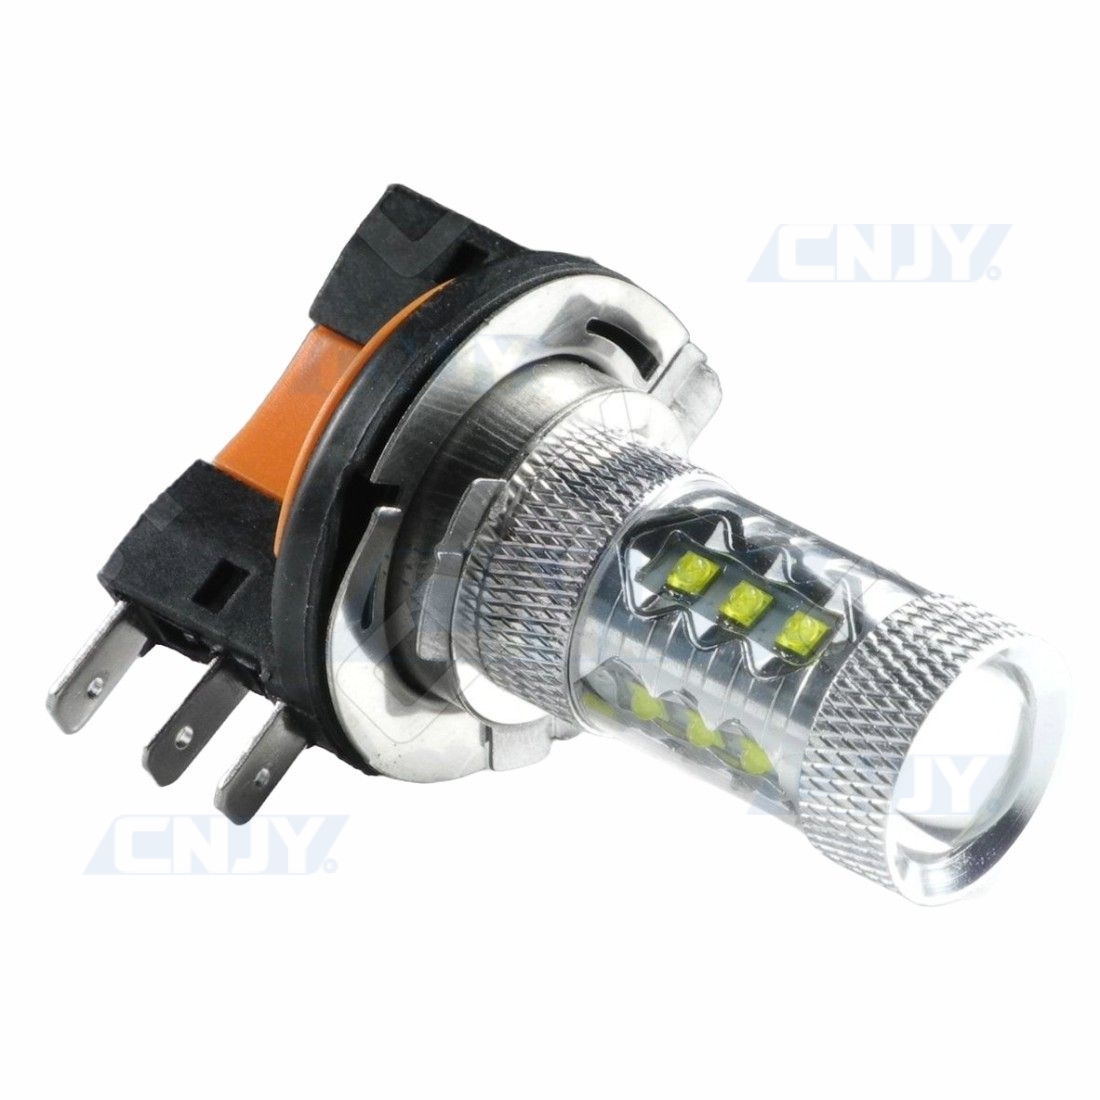 https://www.cnjy-led.fr/14619-thickbox_default/ampoule-led-h15-cree-xpe-80w-55-15w-drl-canbus-culot-pgj23t-1-6000k-lenticulaire-12v-auto-moto-.jpg